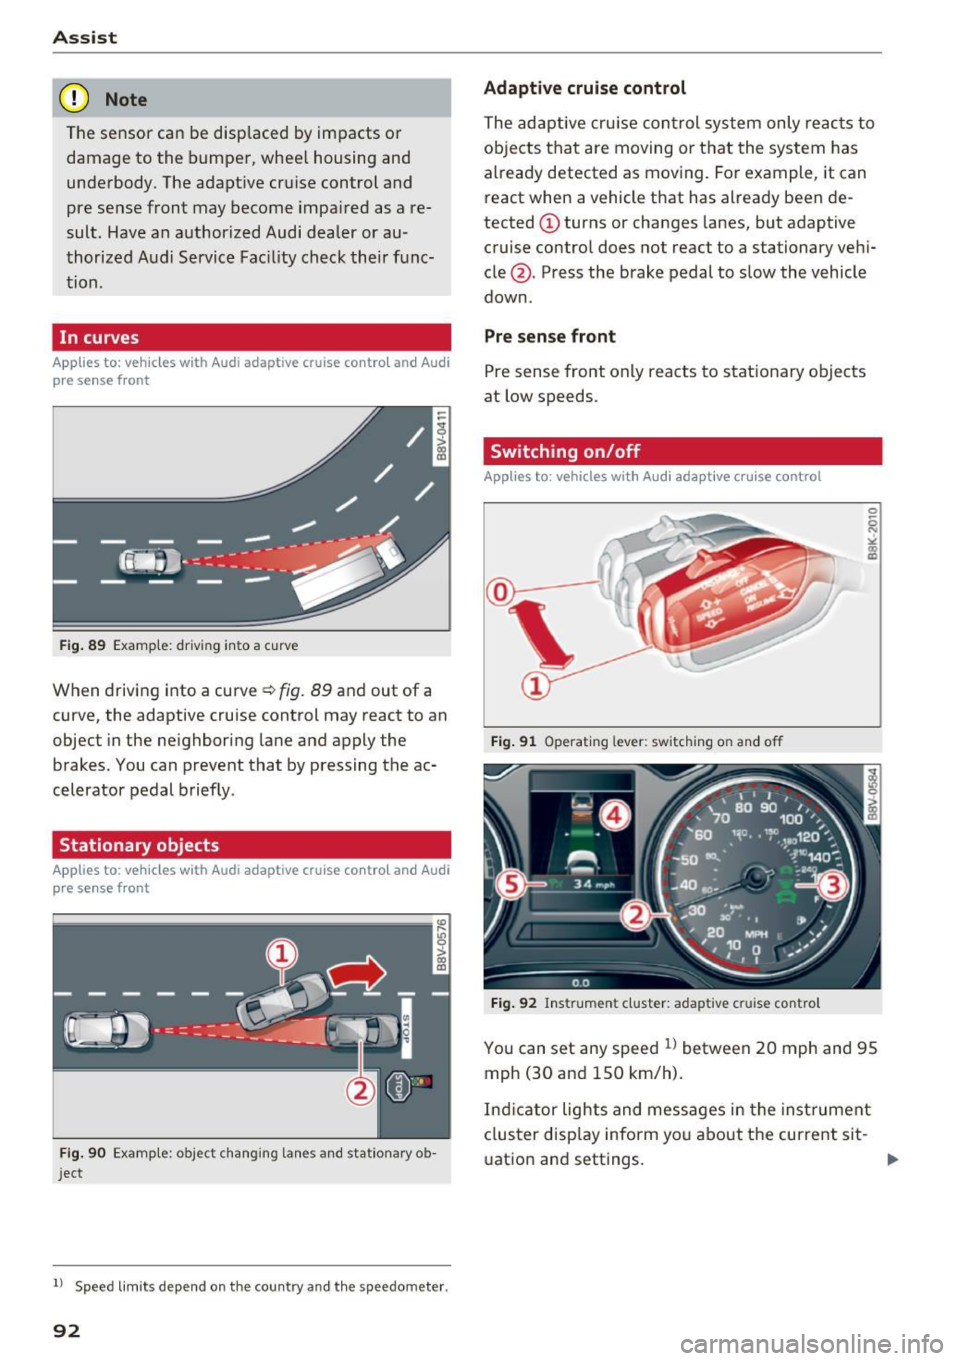 AUDI A3 CABRIOLET 2016  Owners Manual Ass is t 
(D Note 
The sensor can be displaced  by impacts  or 
damage to  the  bumper,  whee l housing  and 
underbody.  The adaptive  cruise control  and 
pre sense front  may become impa ired as  a